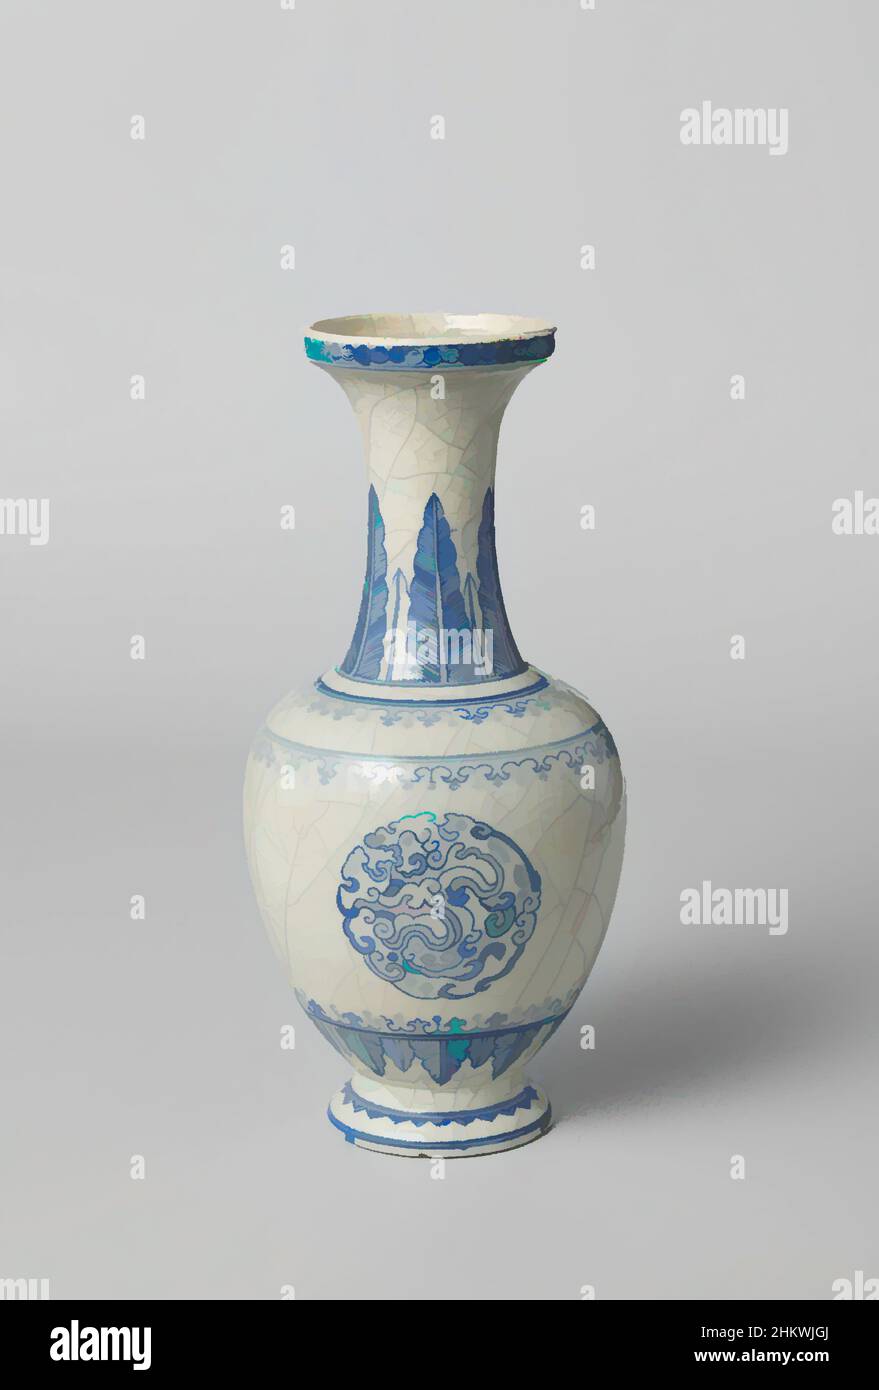 Art inspired by Ovoid vase with three medallions of stylized waves, Ovoid vase of soft-paste porcelain (pâte tendre) with long, spreading neck and raised rim, painted in underglaze blue. On the wall decorative bands and three medallions with stylized waves; the neck with a band of, Classic works modernized by Artotop with a splash of modernity. Shapes, color and value, eye-catching visual impact on art. Emotions through freedom of artworks in a contemporary way. A timeless message pursuing a wildly creative new direction. Artists turning to the digital medium and creating the Artotop NFT Stock Photo